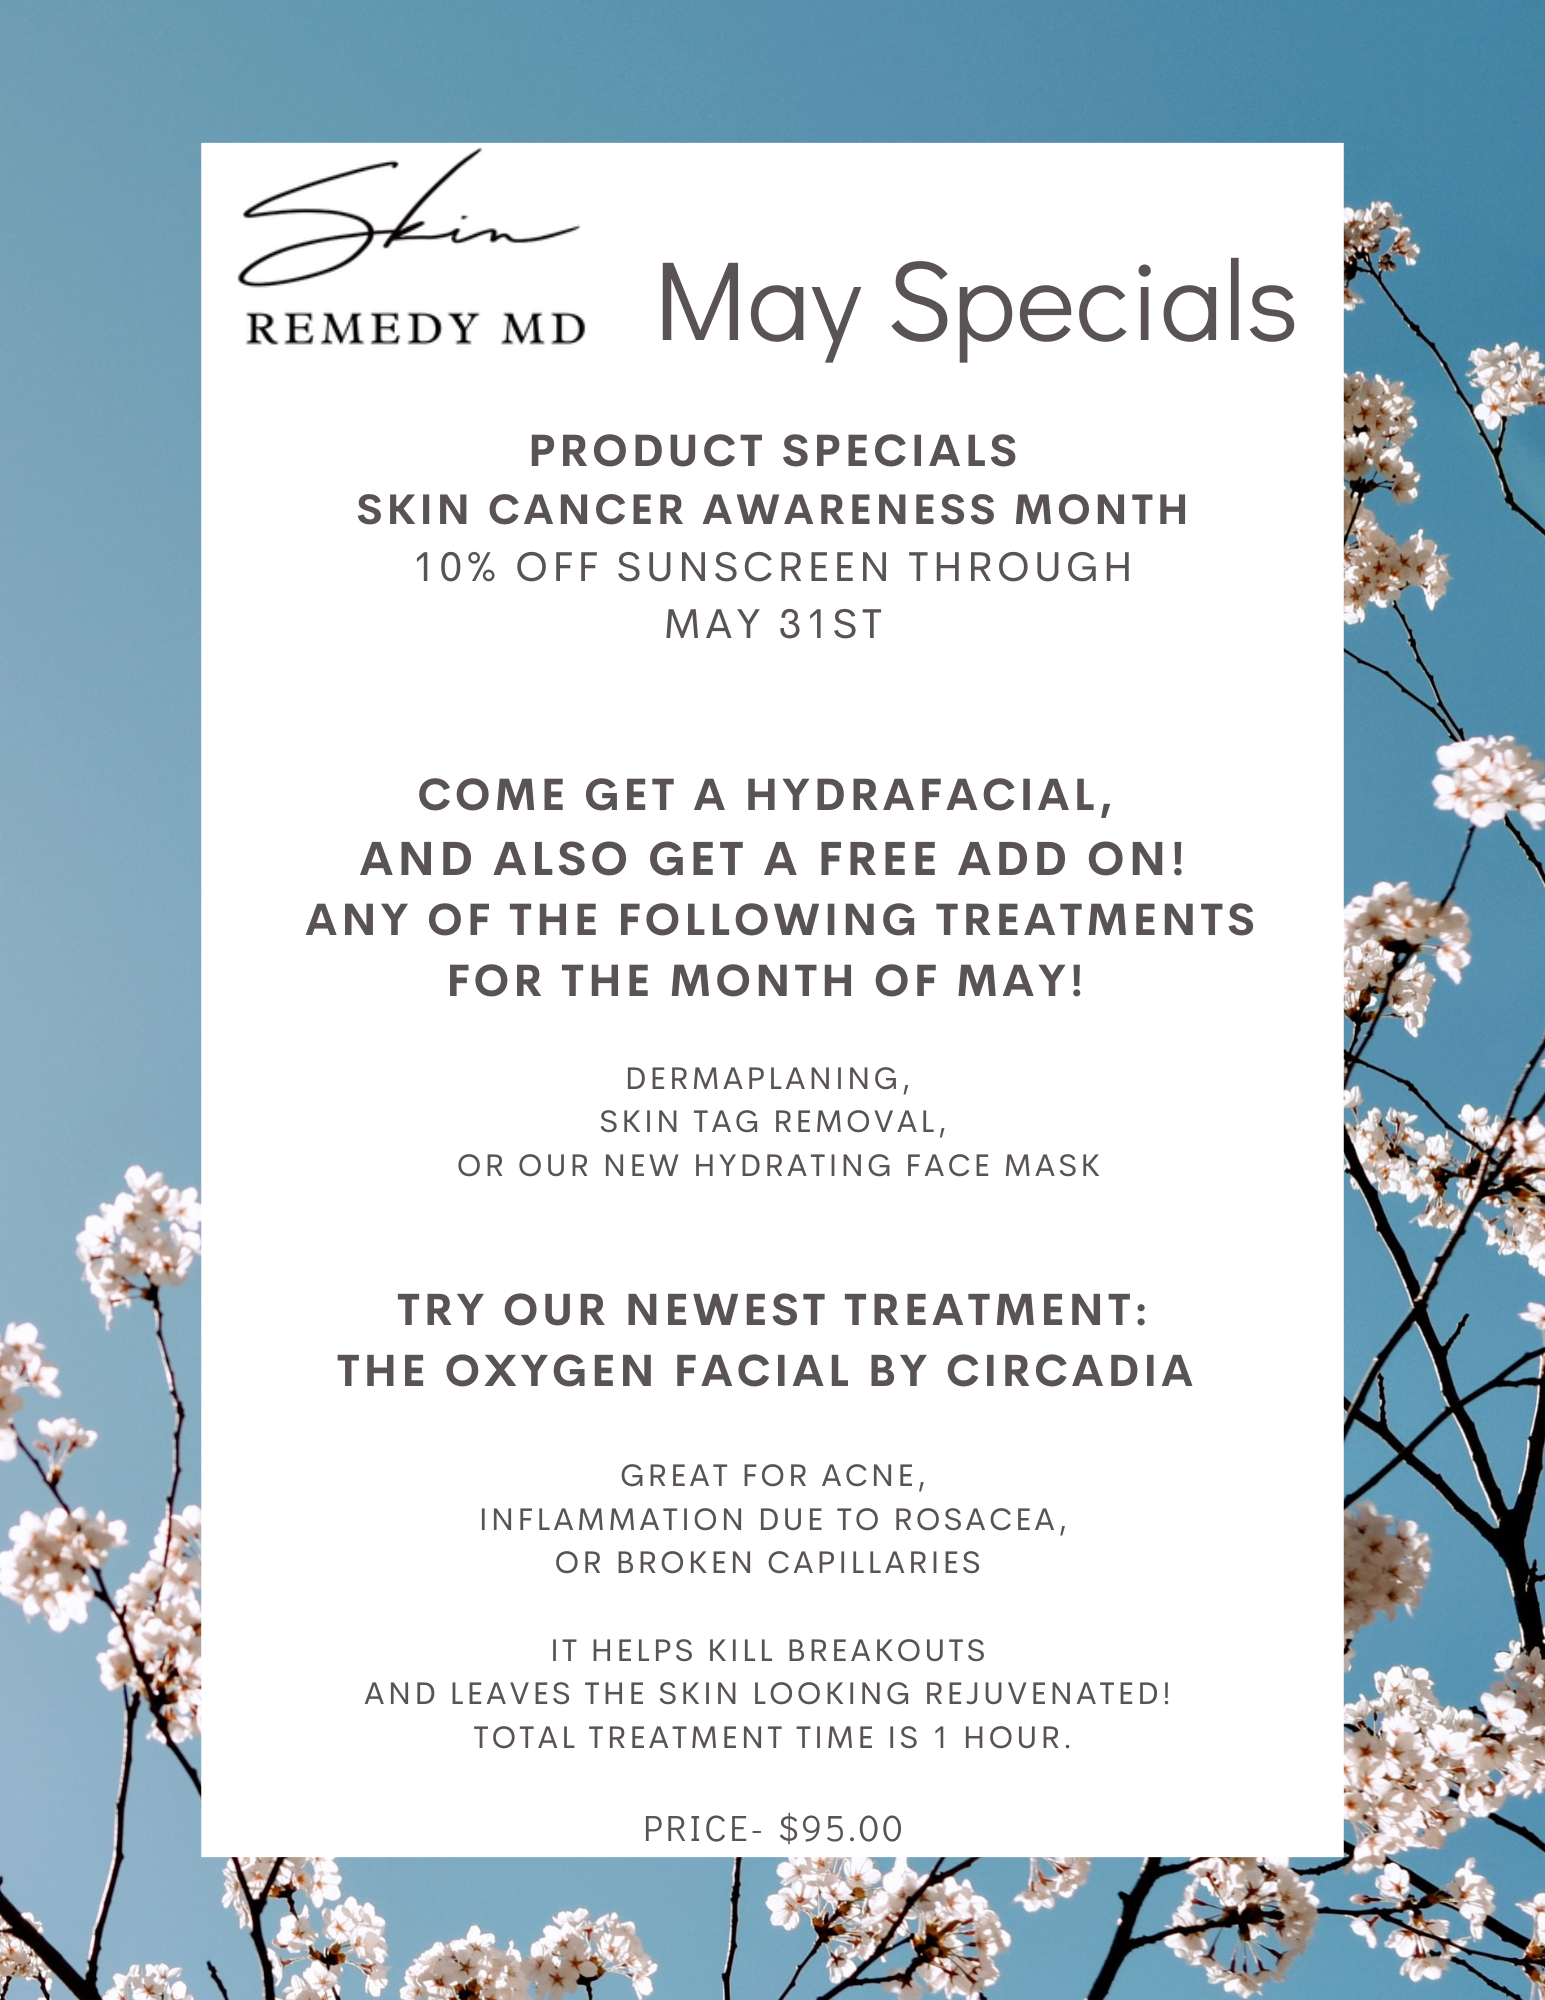 PRODUCT SPECIALS SKIN CANCER AWARENESS MONTH 10% OFF SUNSCREEN THROUGH mAY 31ST COME GET A Hydrafacial, AND ALSO Get a free add on! any of the following treatments for the month of May! Dermaplaning, Skin tag removal, or our NEW hydrating face mask try our newest treatment: The Oxygen facial by Circadia great for acne, Inflammation due to rosacea, or broken capillaries It helps kill breakouts and leaves the skin looking rejuvenated! Total treatment time is 1 Hour. Price- $95.00